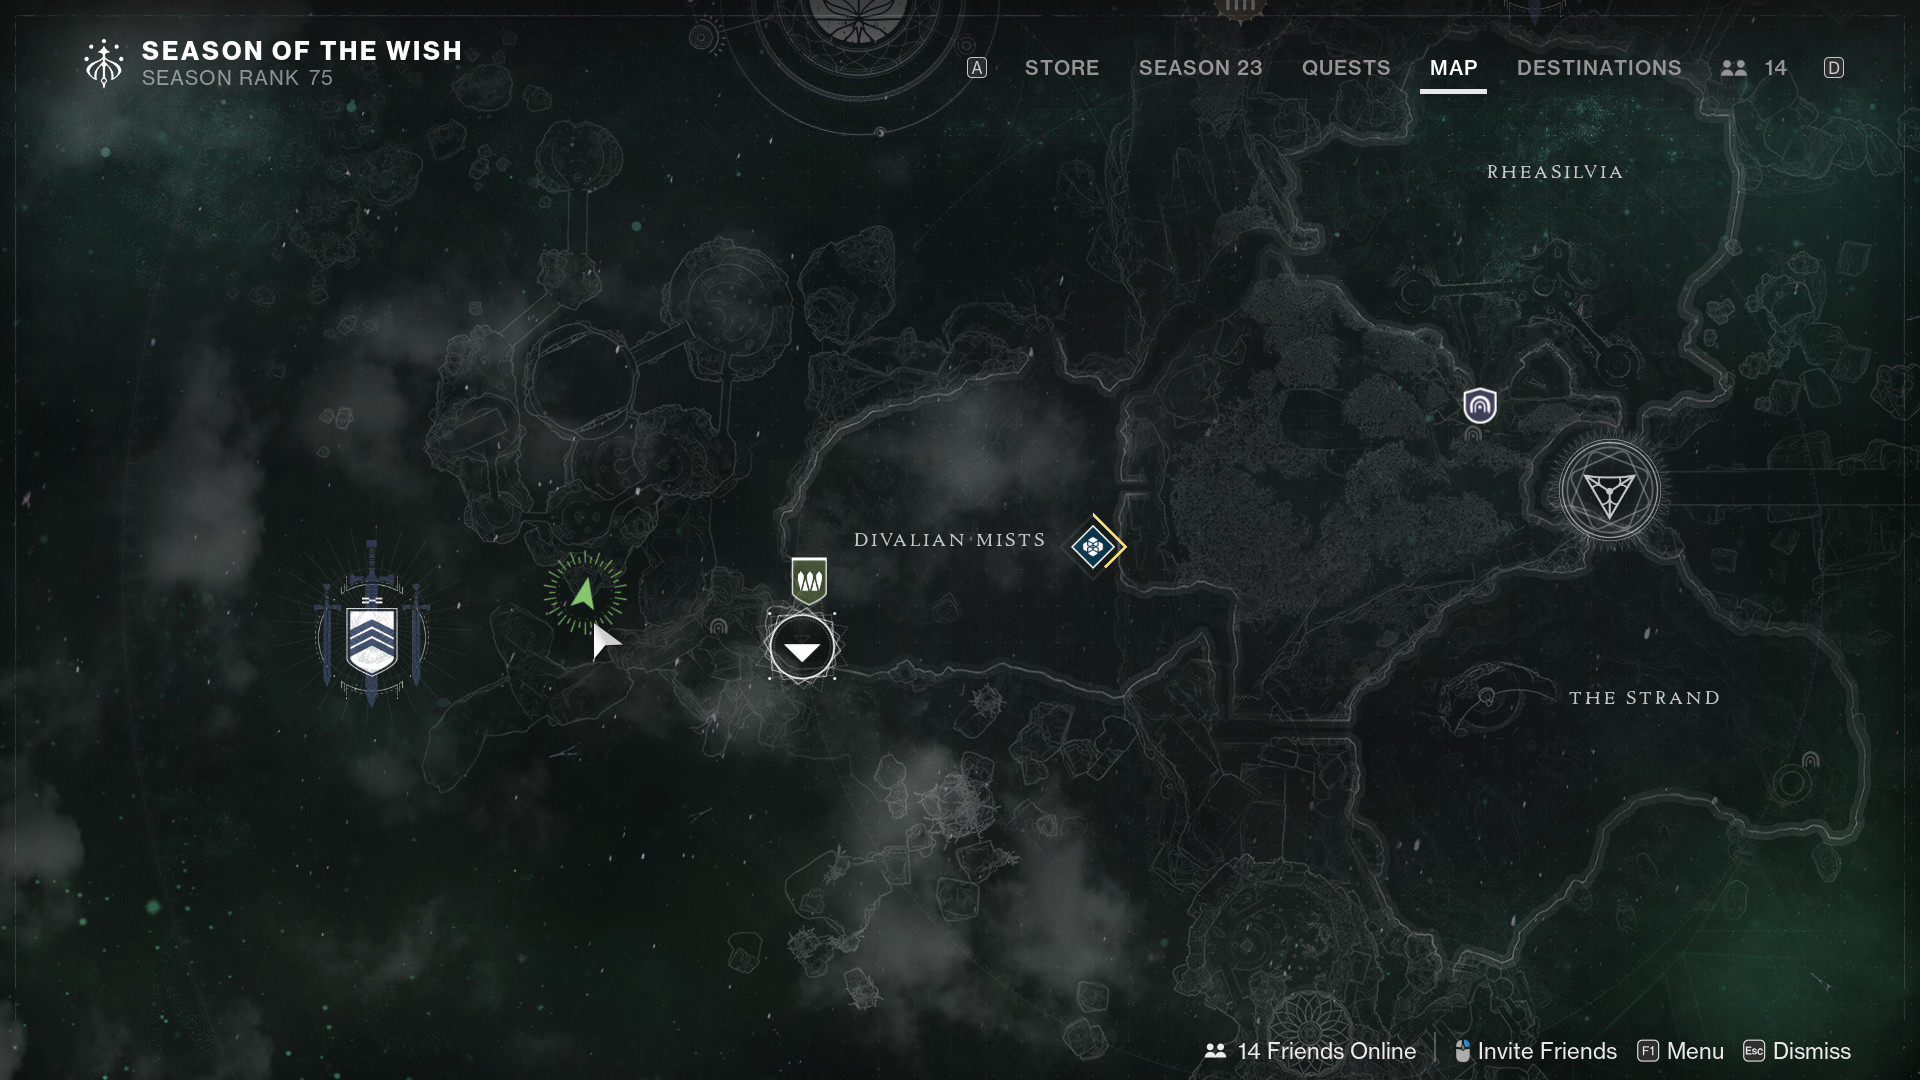 A map of the Dreaming City in Destiny 2